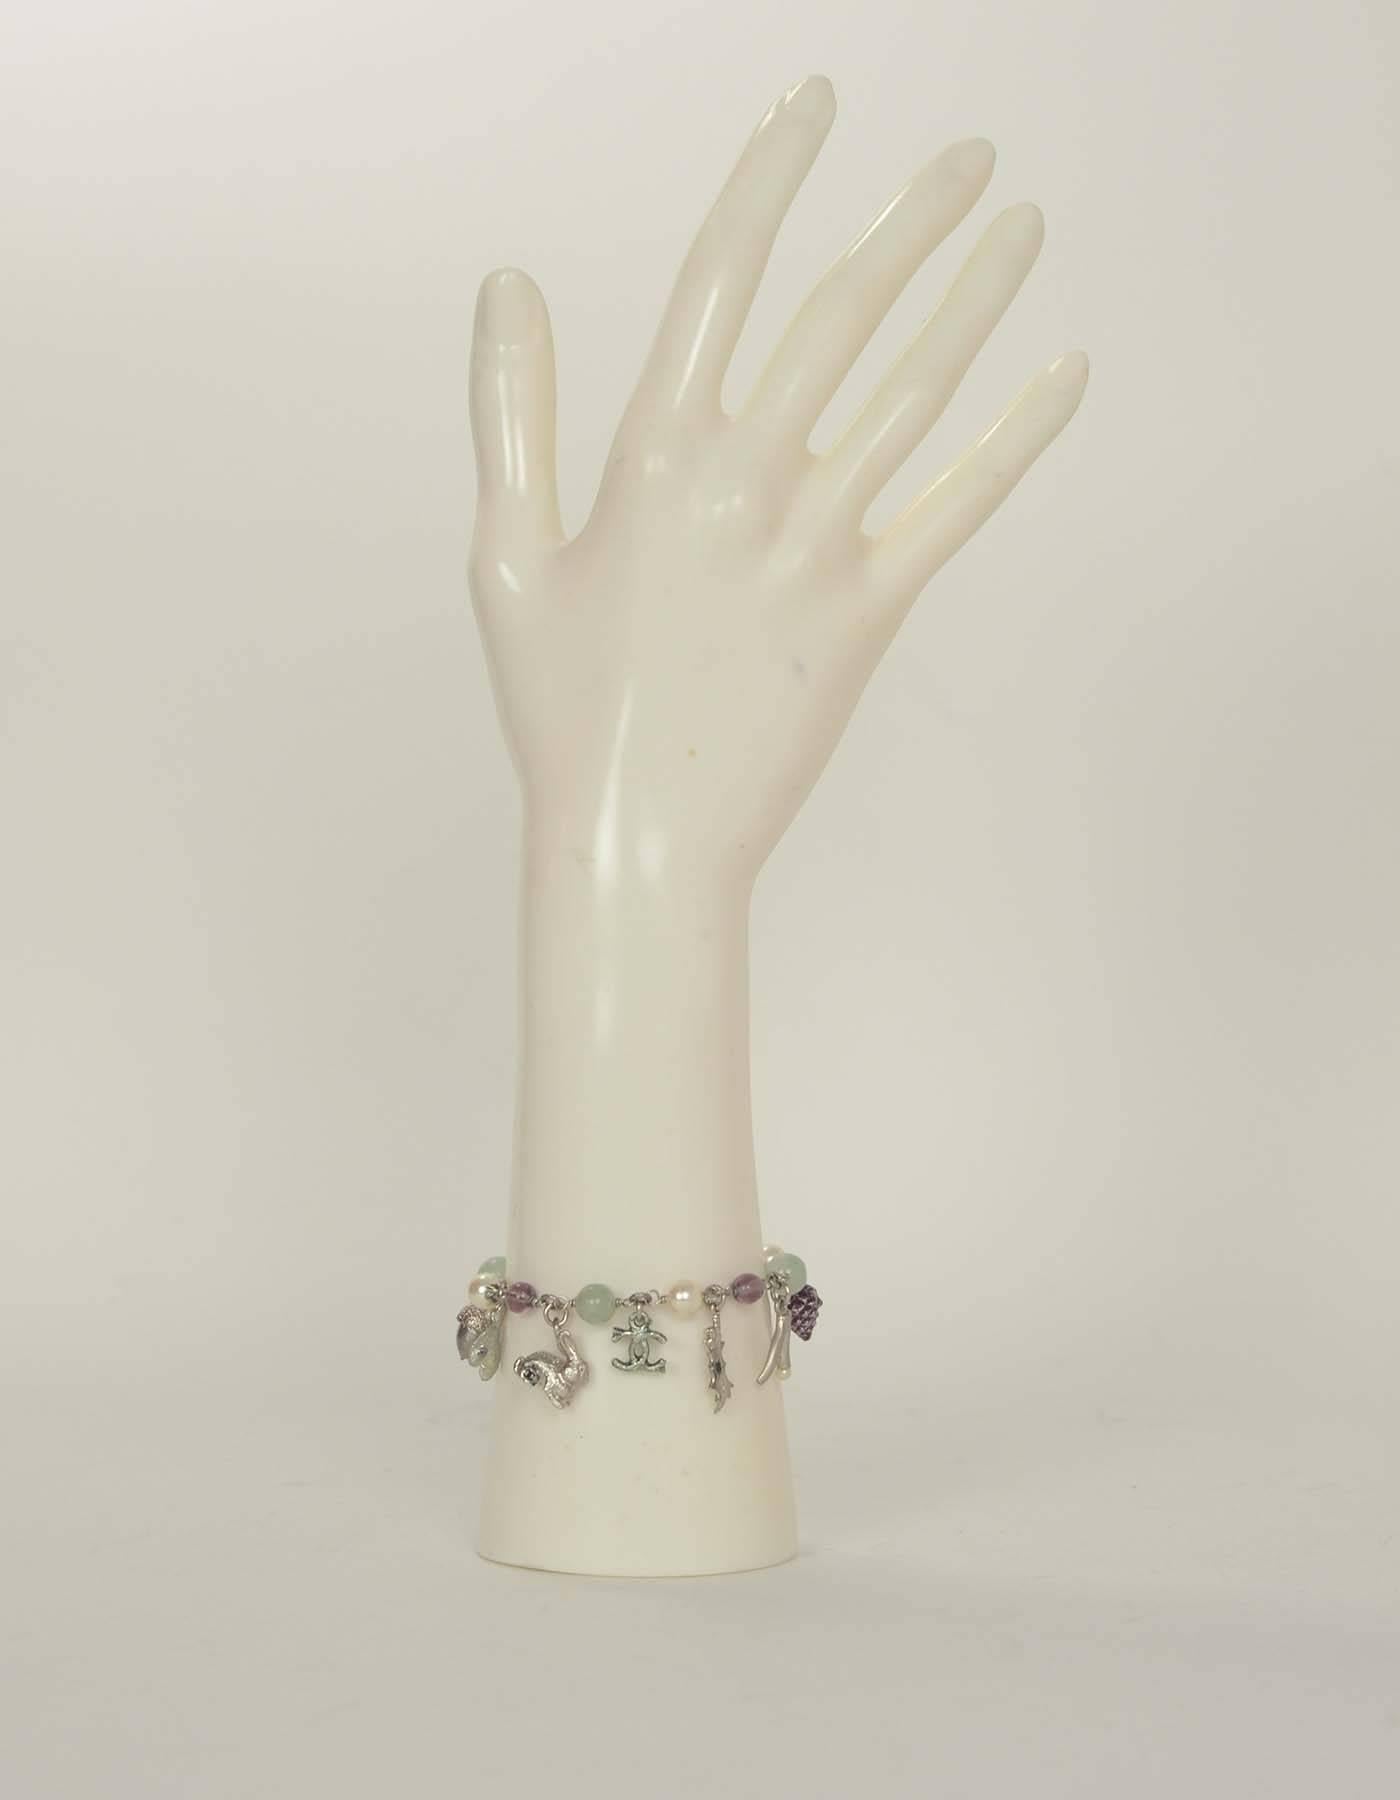 Chanel Multicolored Bracelet with Autumn Charms

Color: Green, purple, silver
Materials: Metal, glass, faux pearls
Closure: Lobster claw closure
Overall Condition: Excellent pre-owned condition with the exception of light marks